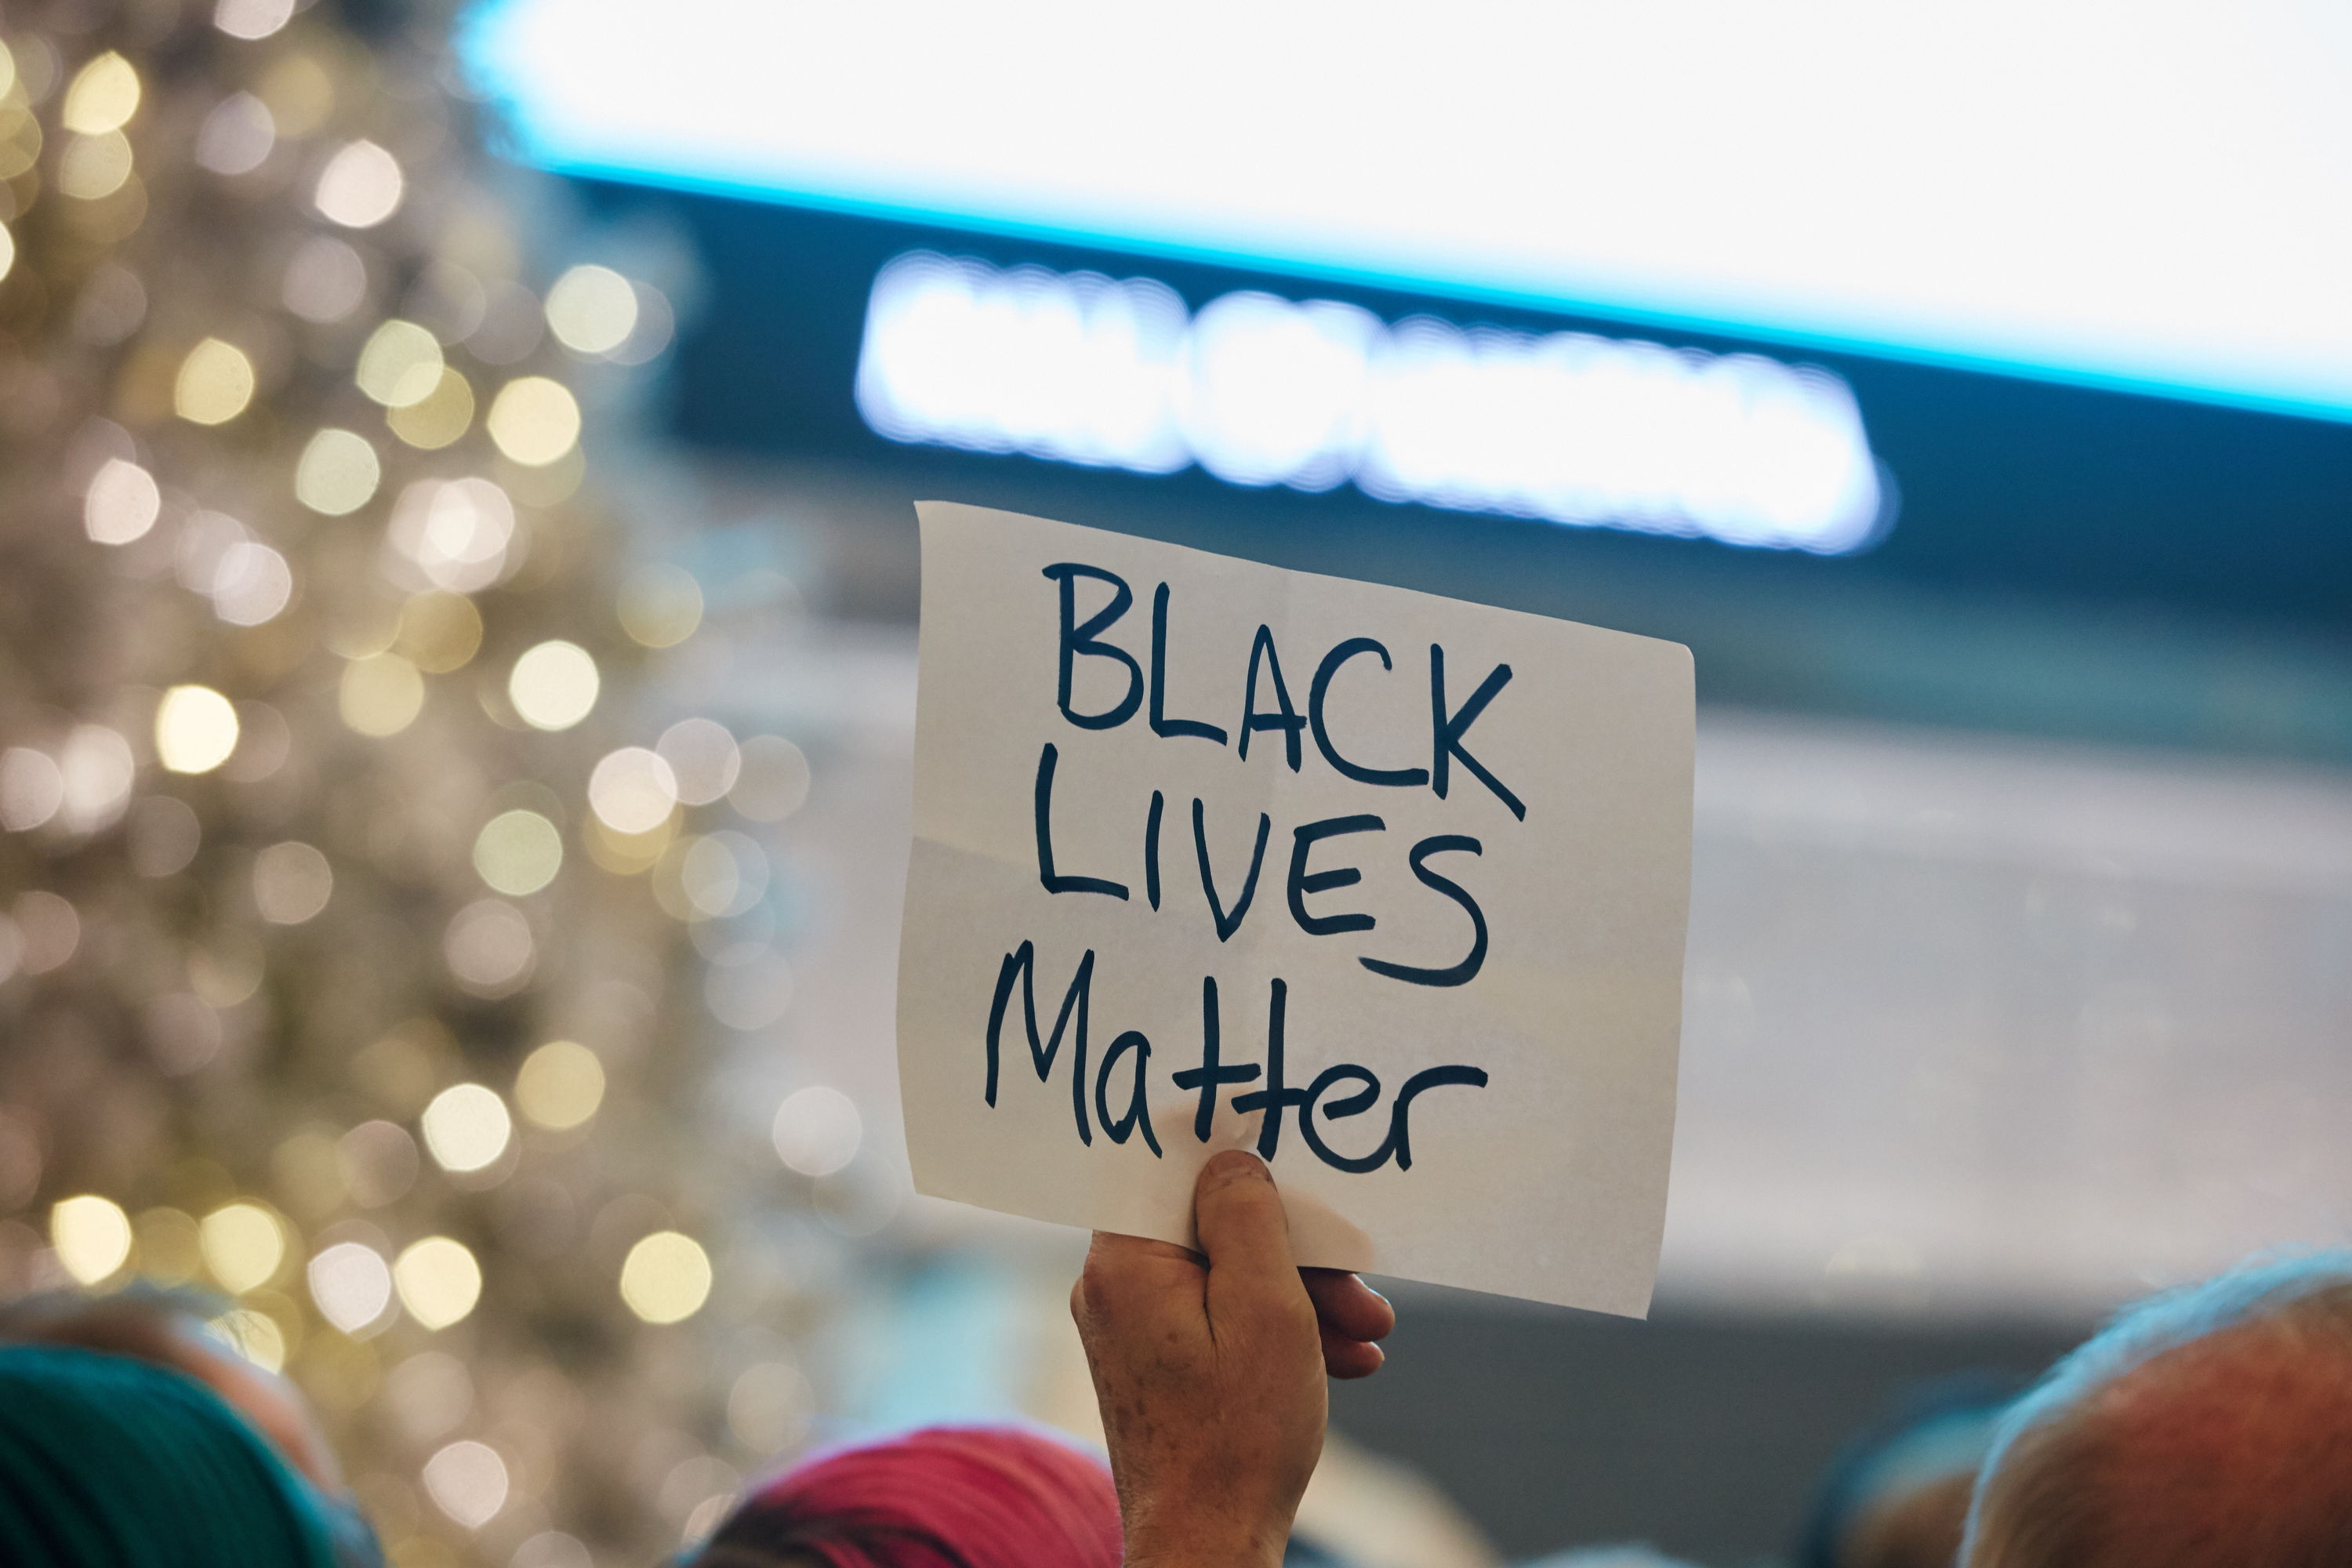 Thousands of protesters from the group "Black Lives Matter" disrupt holiday shoppers on Dec. 20, 2014 at Mall of America in Bloomington, Minn. (Adam Bettcher—Getty Images)